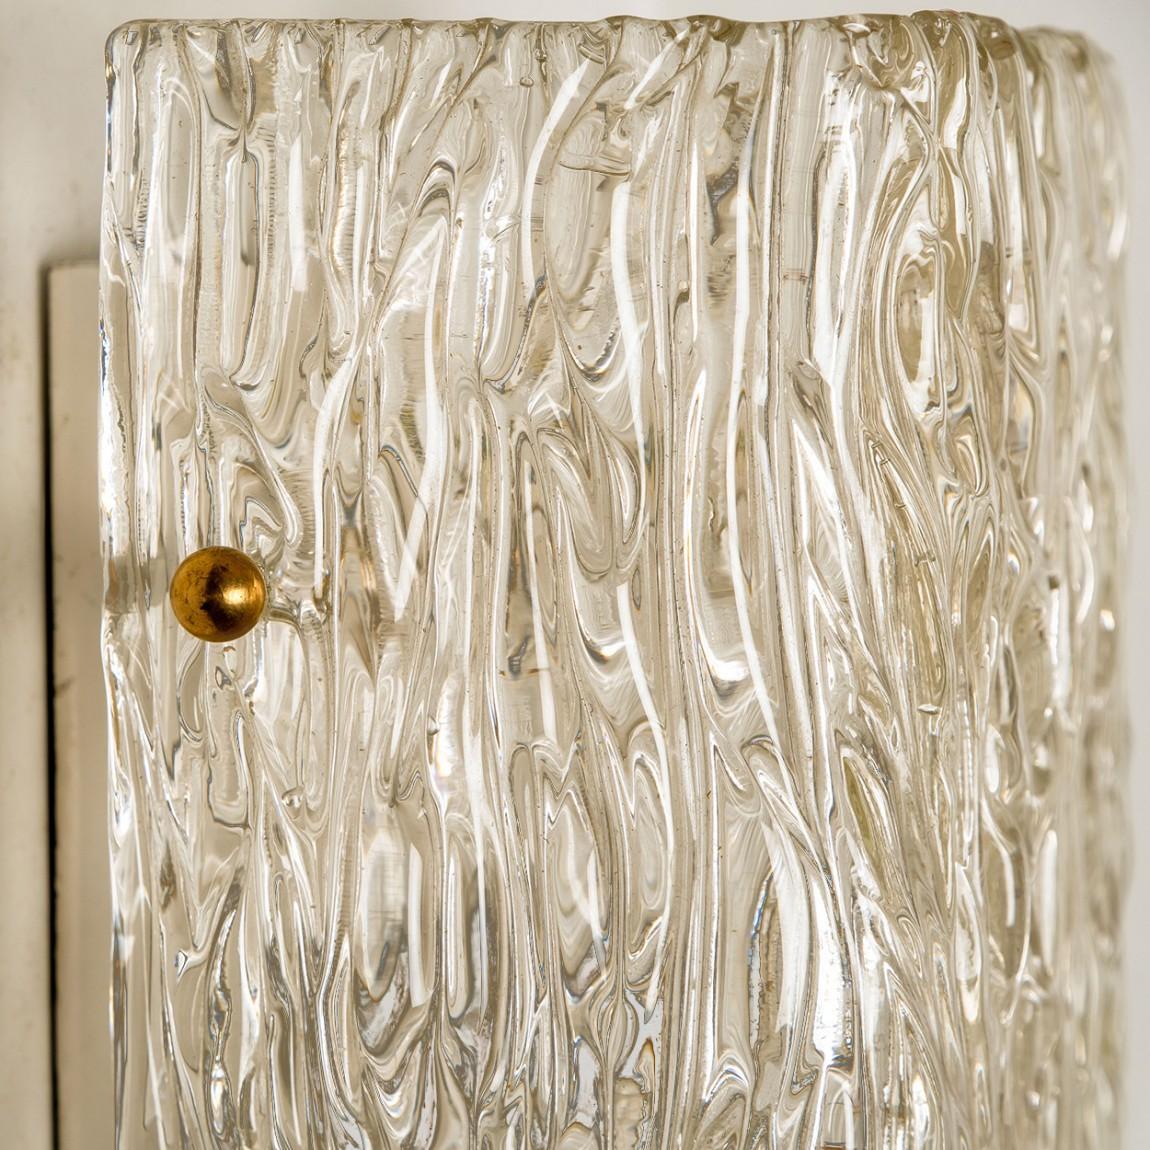 Lacquered Rectangular Wave Glass Wall Lights by J.T. Kalmar, Austria, 1960s For Sale